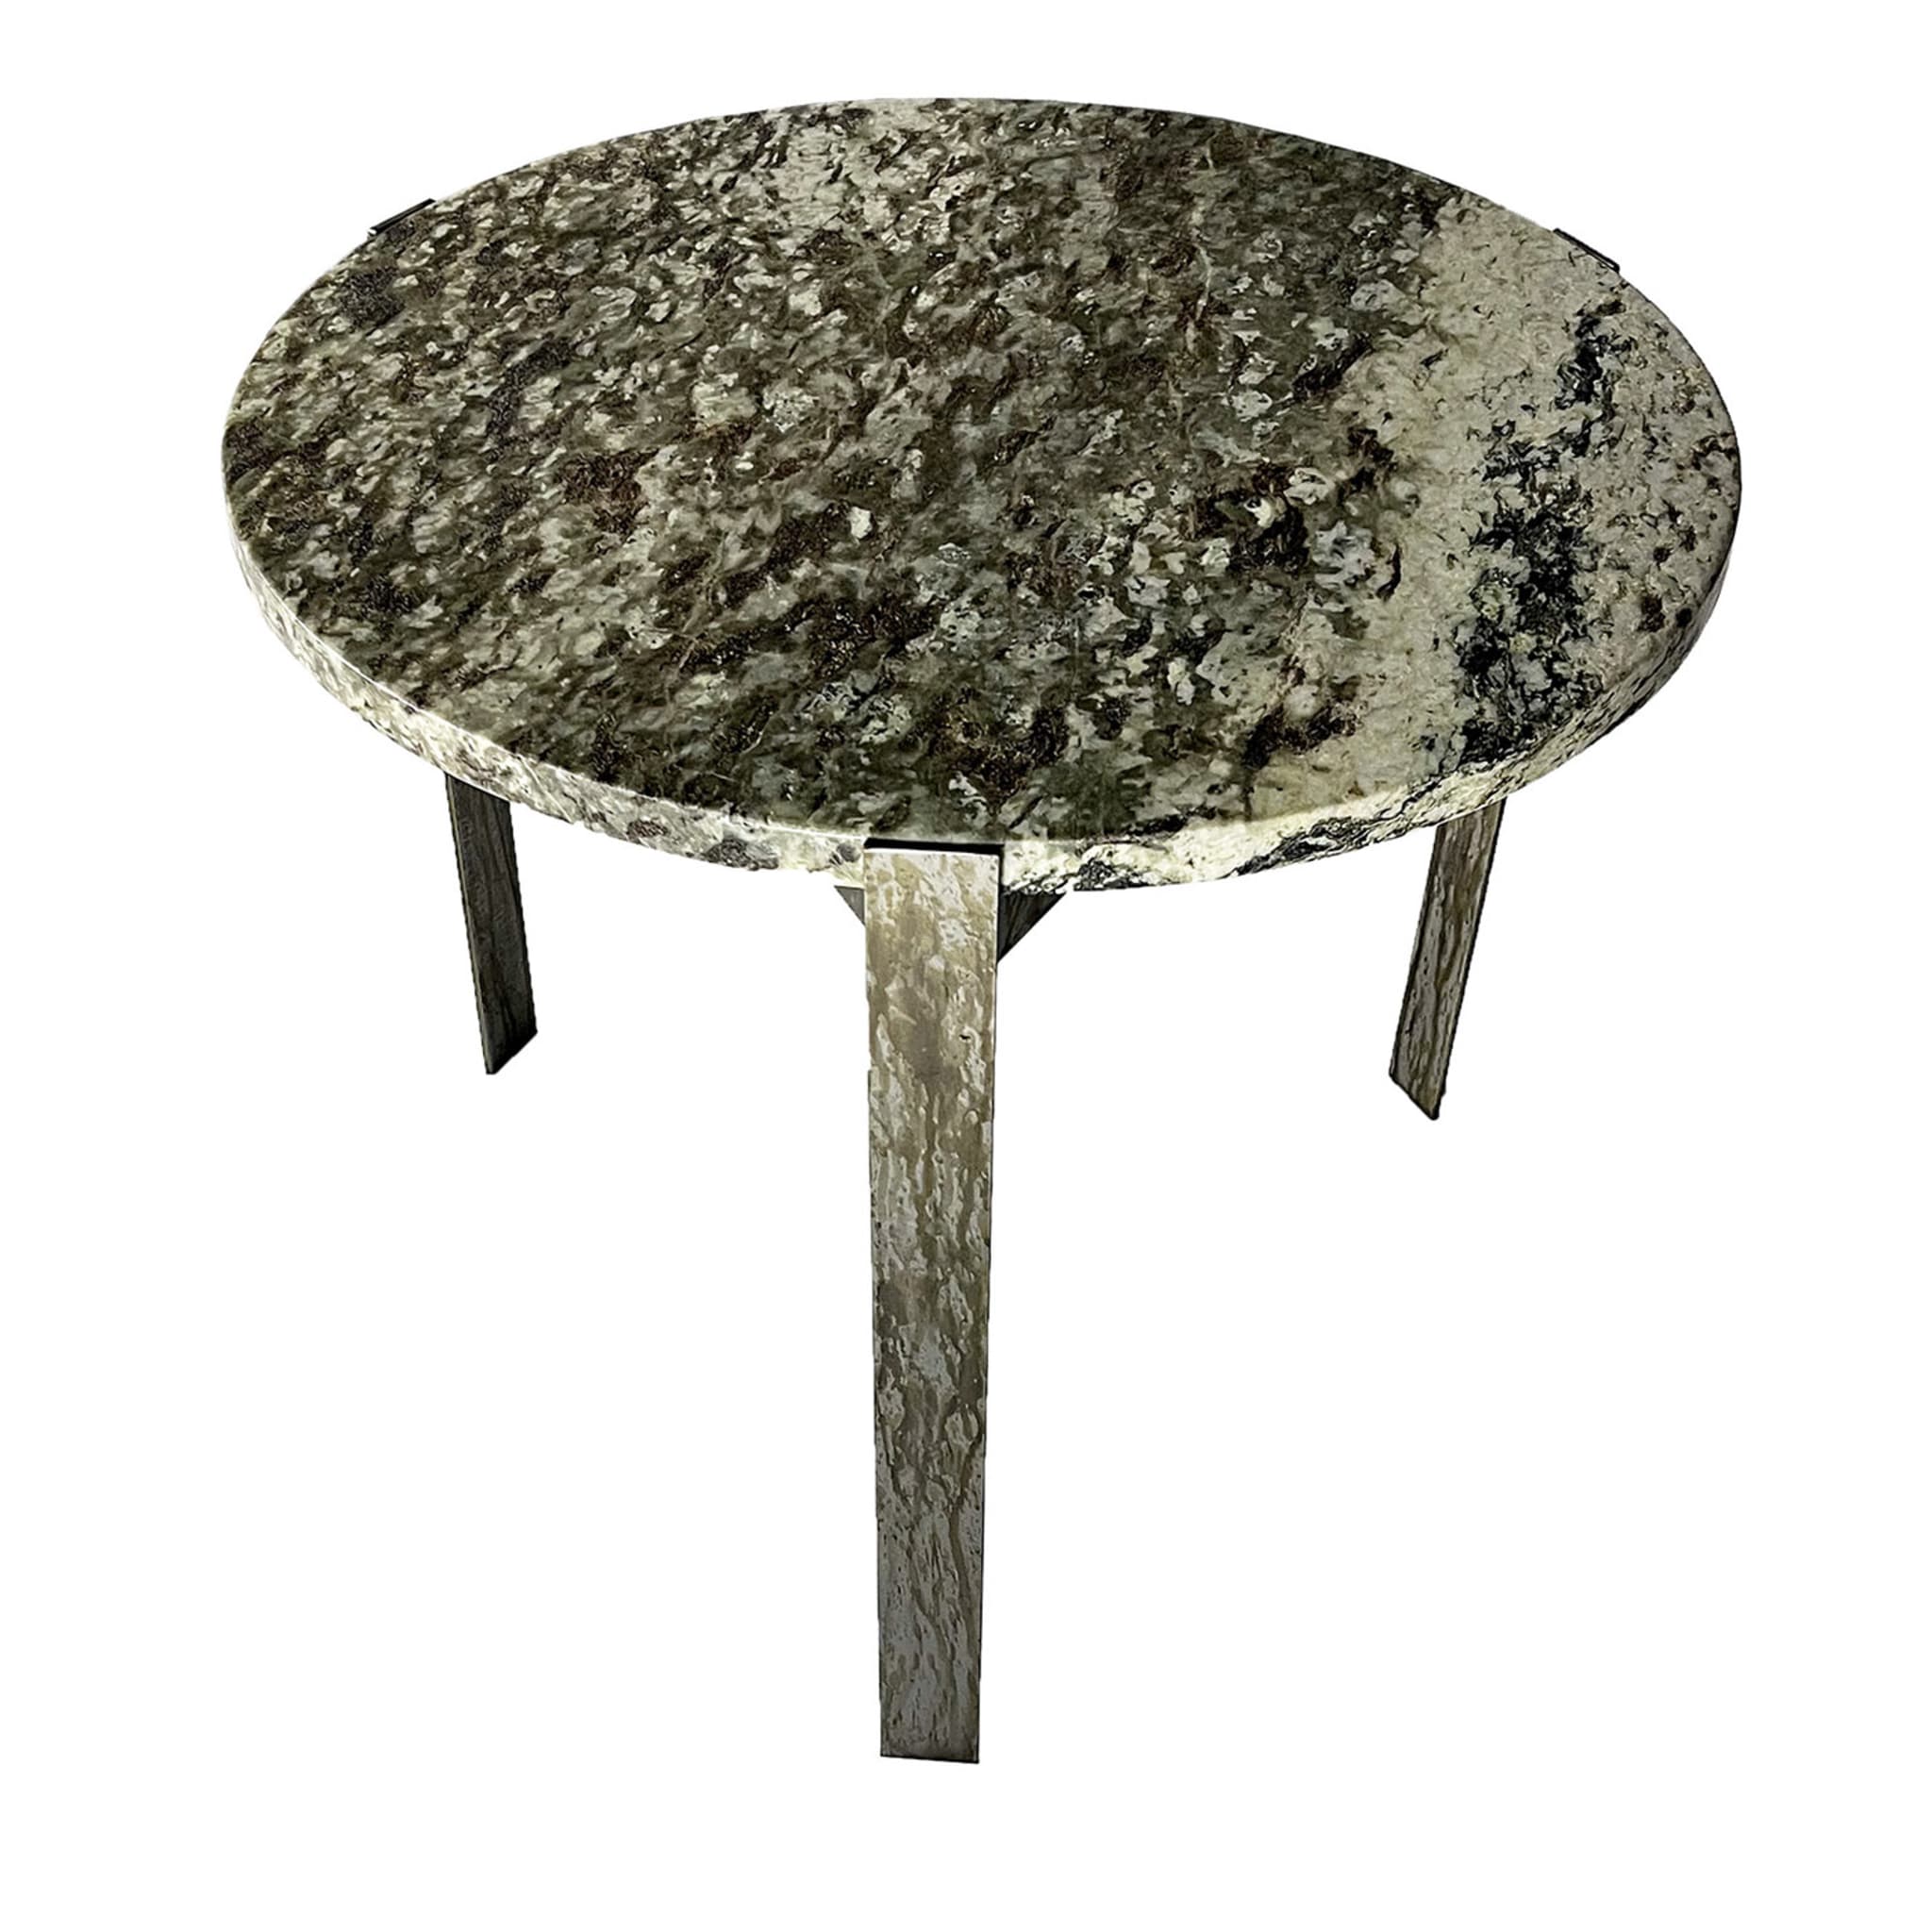 Eneolitica Forrest Circular Coffee Table - Main view